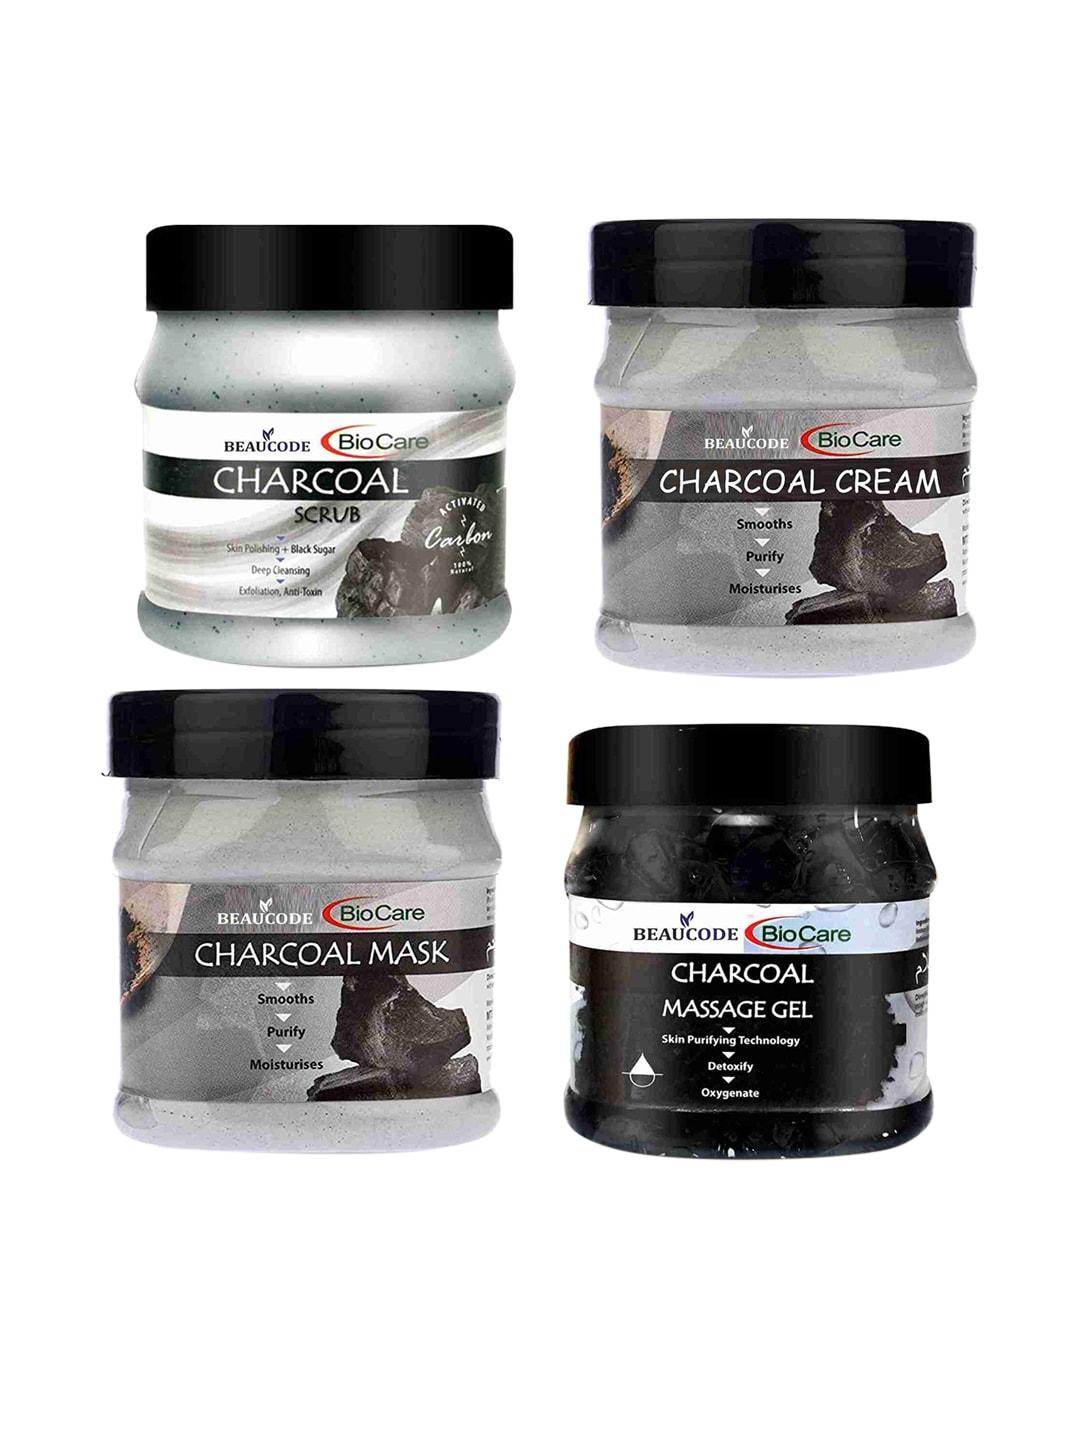 BEAUCODE BIOCARE Charcoal Four Steps Facial Kit - 250 ml each